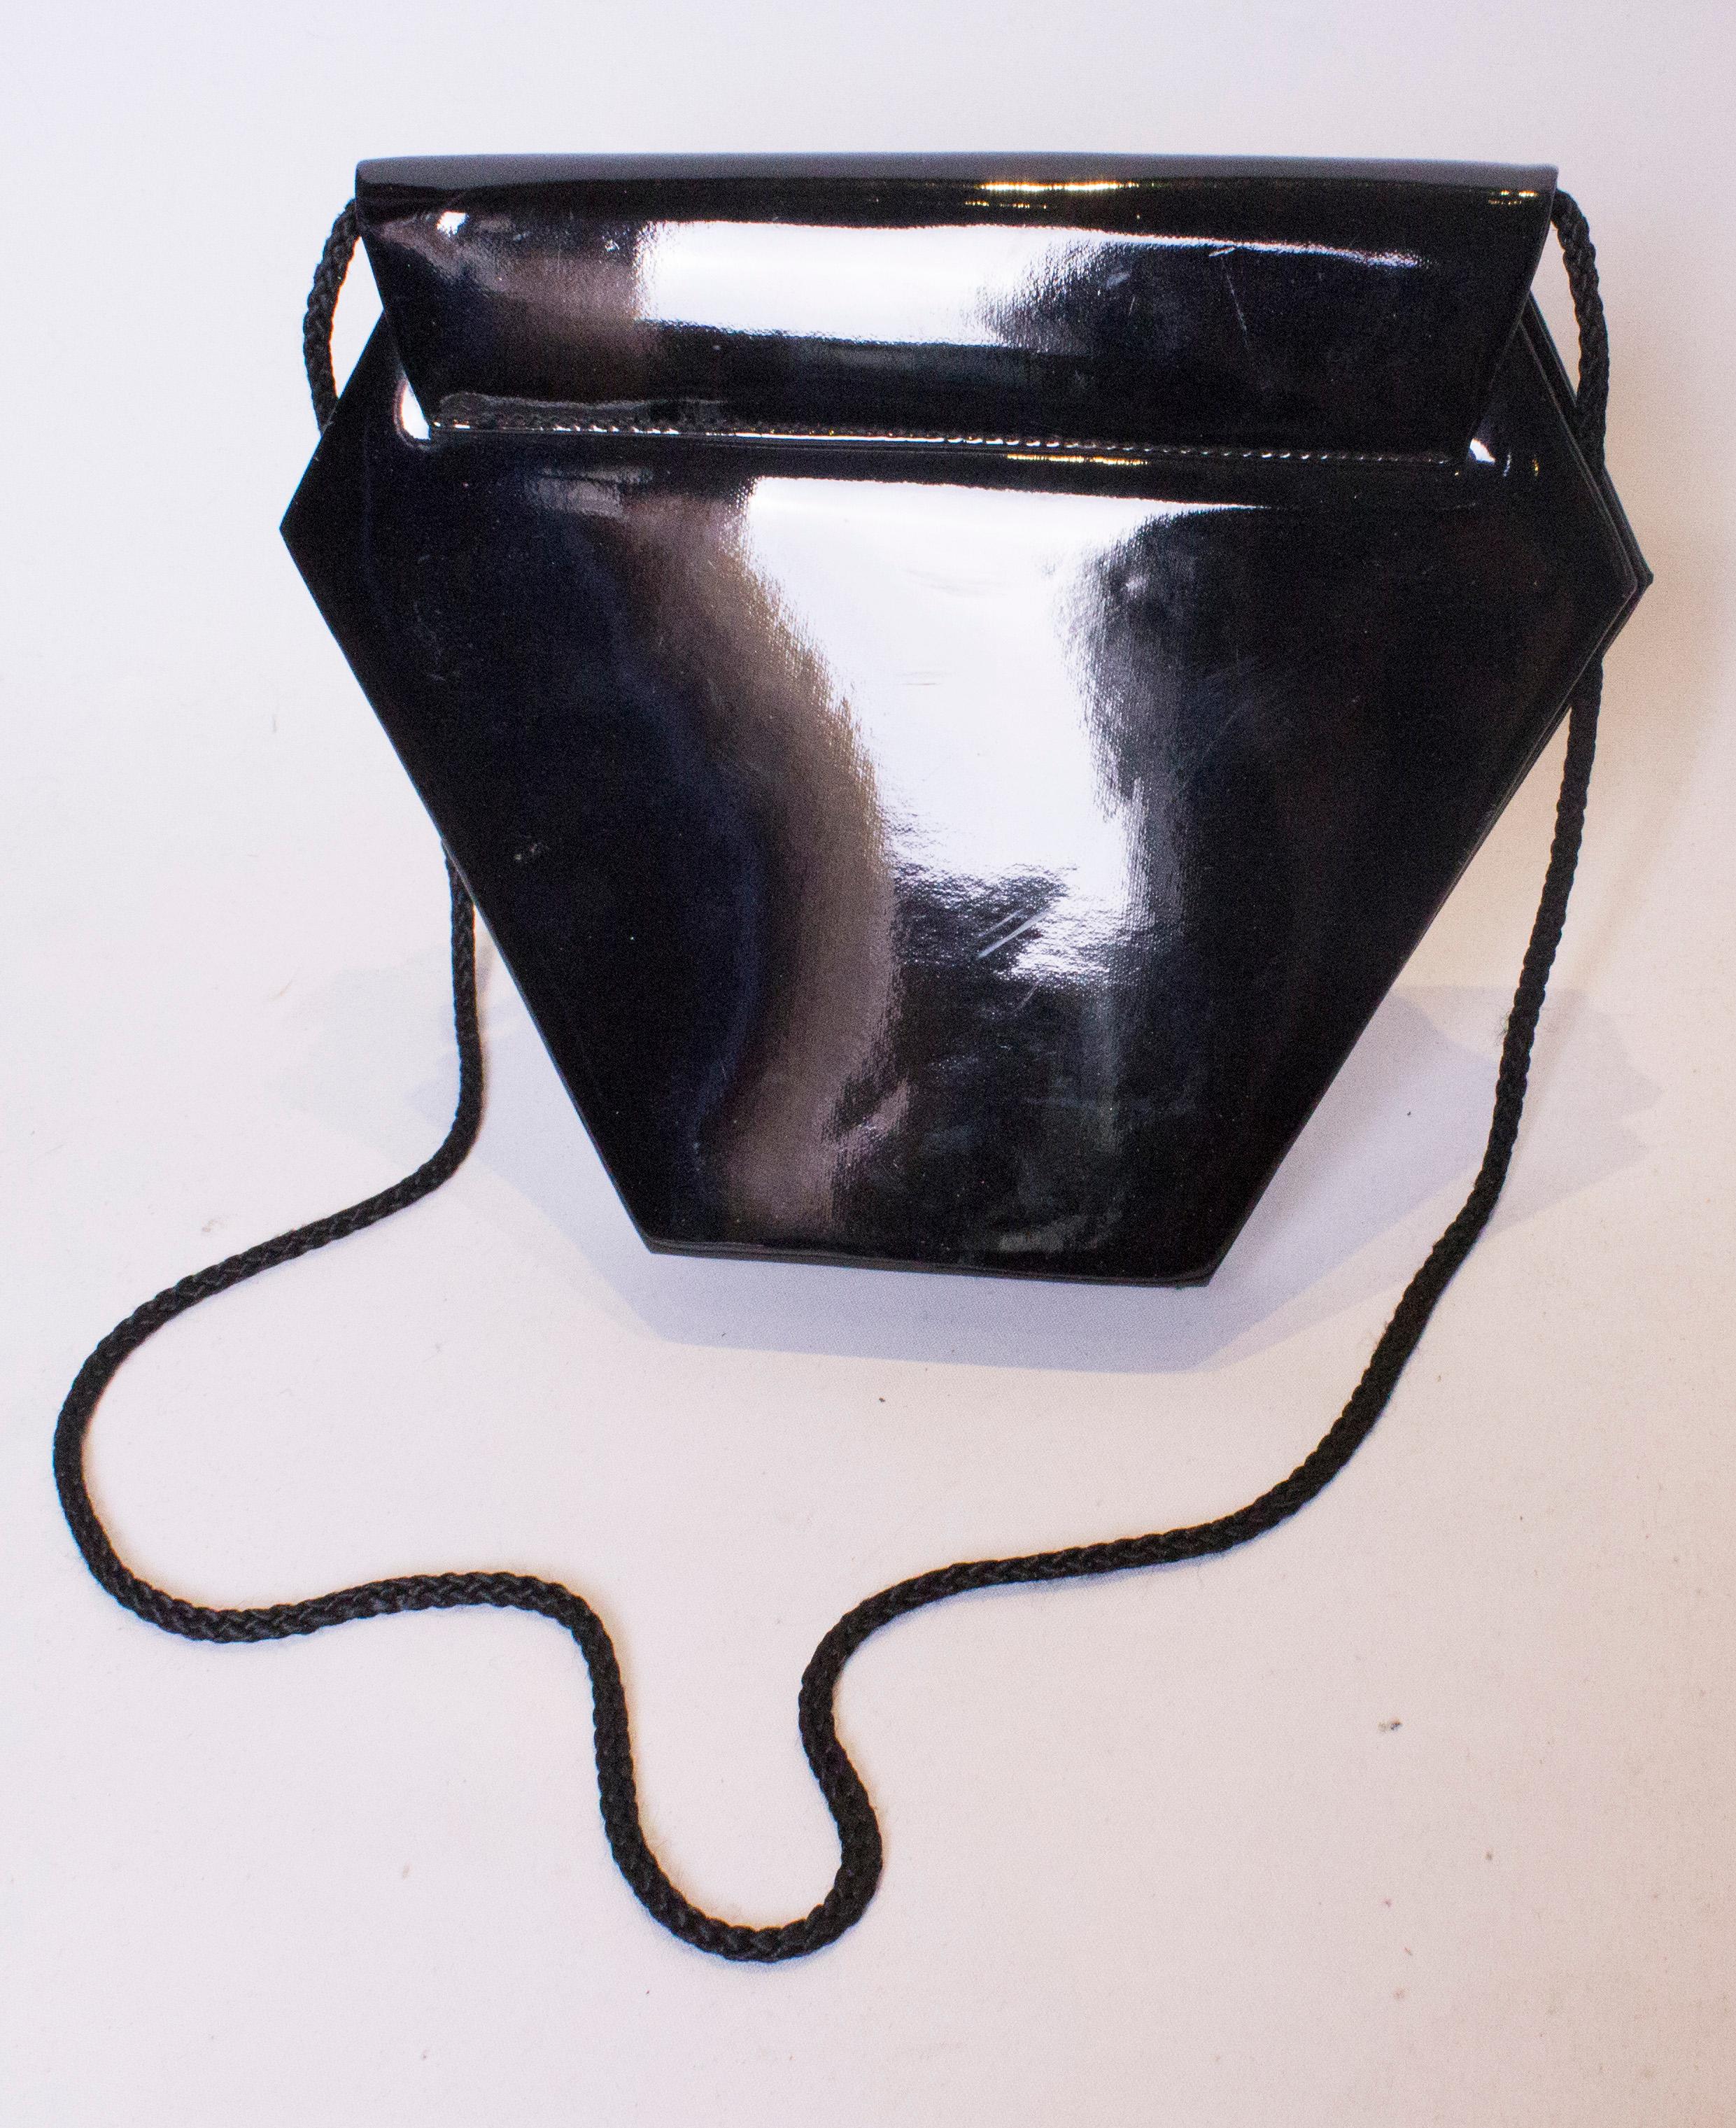 An unusual hexaganal shape patent black bag . The bag has a flap over front with popper fastening, it has an internal pouch pocket and rope shoulder strap.